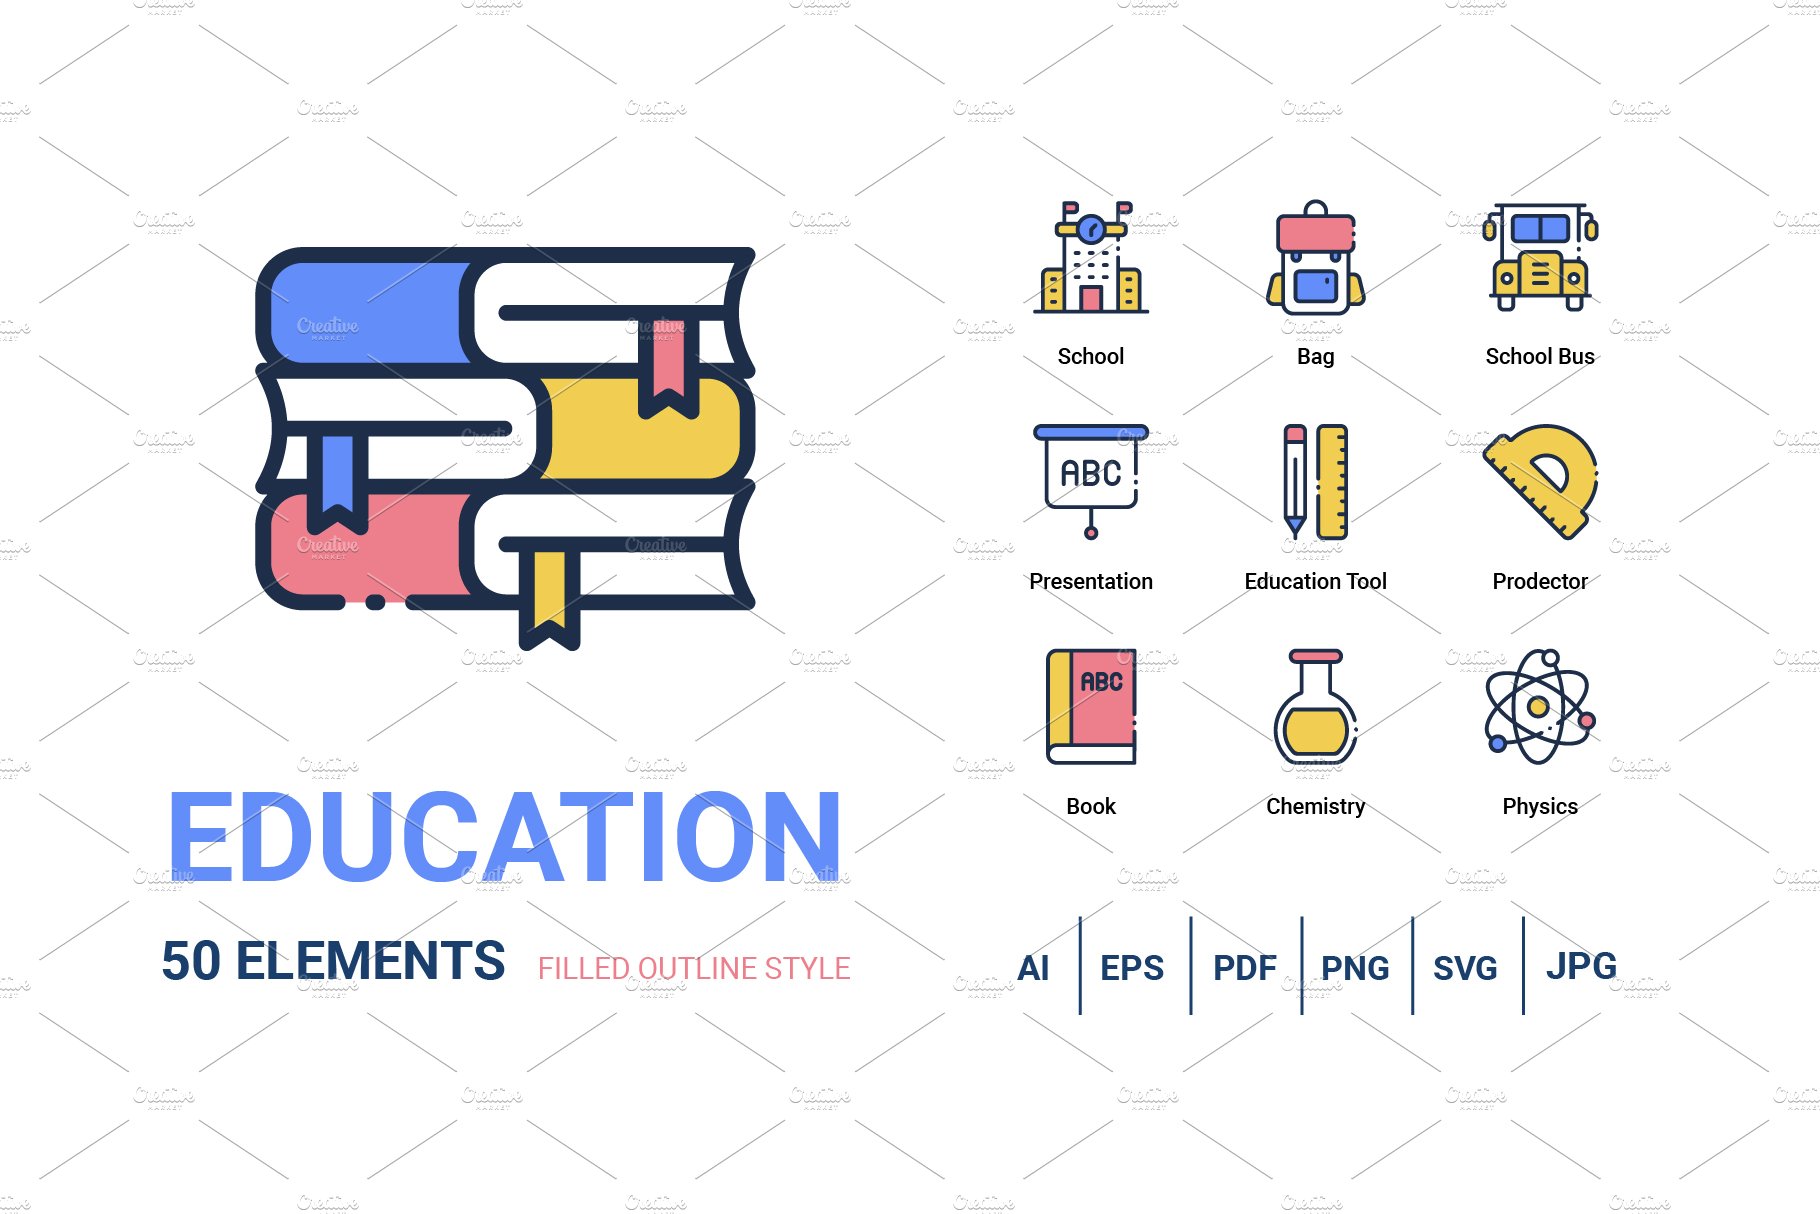 Education Filled Outline Icon cover image.